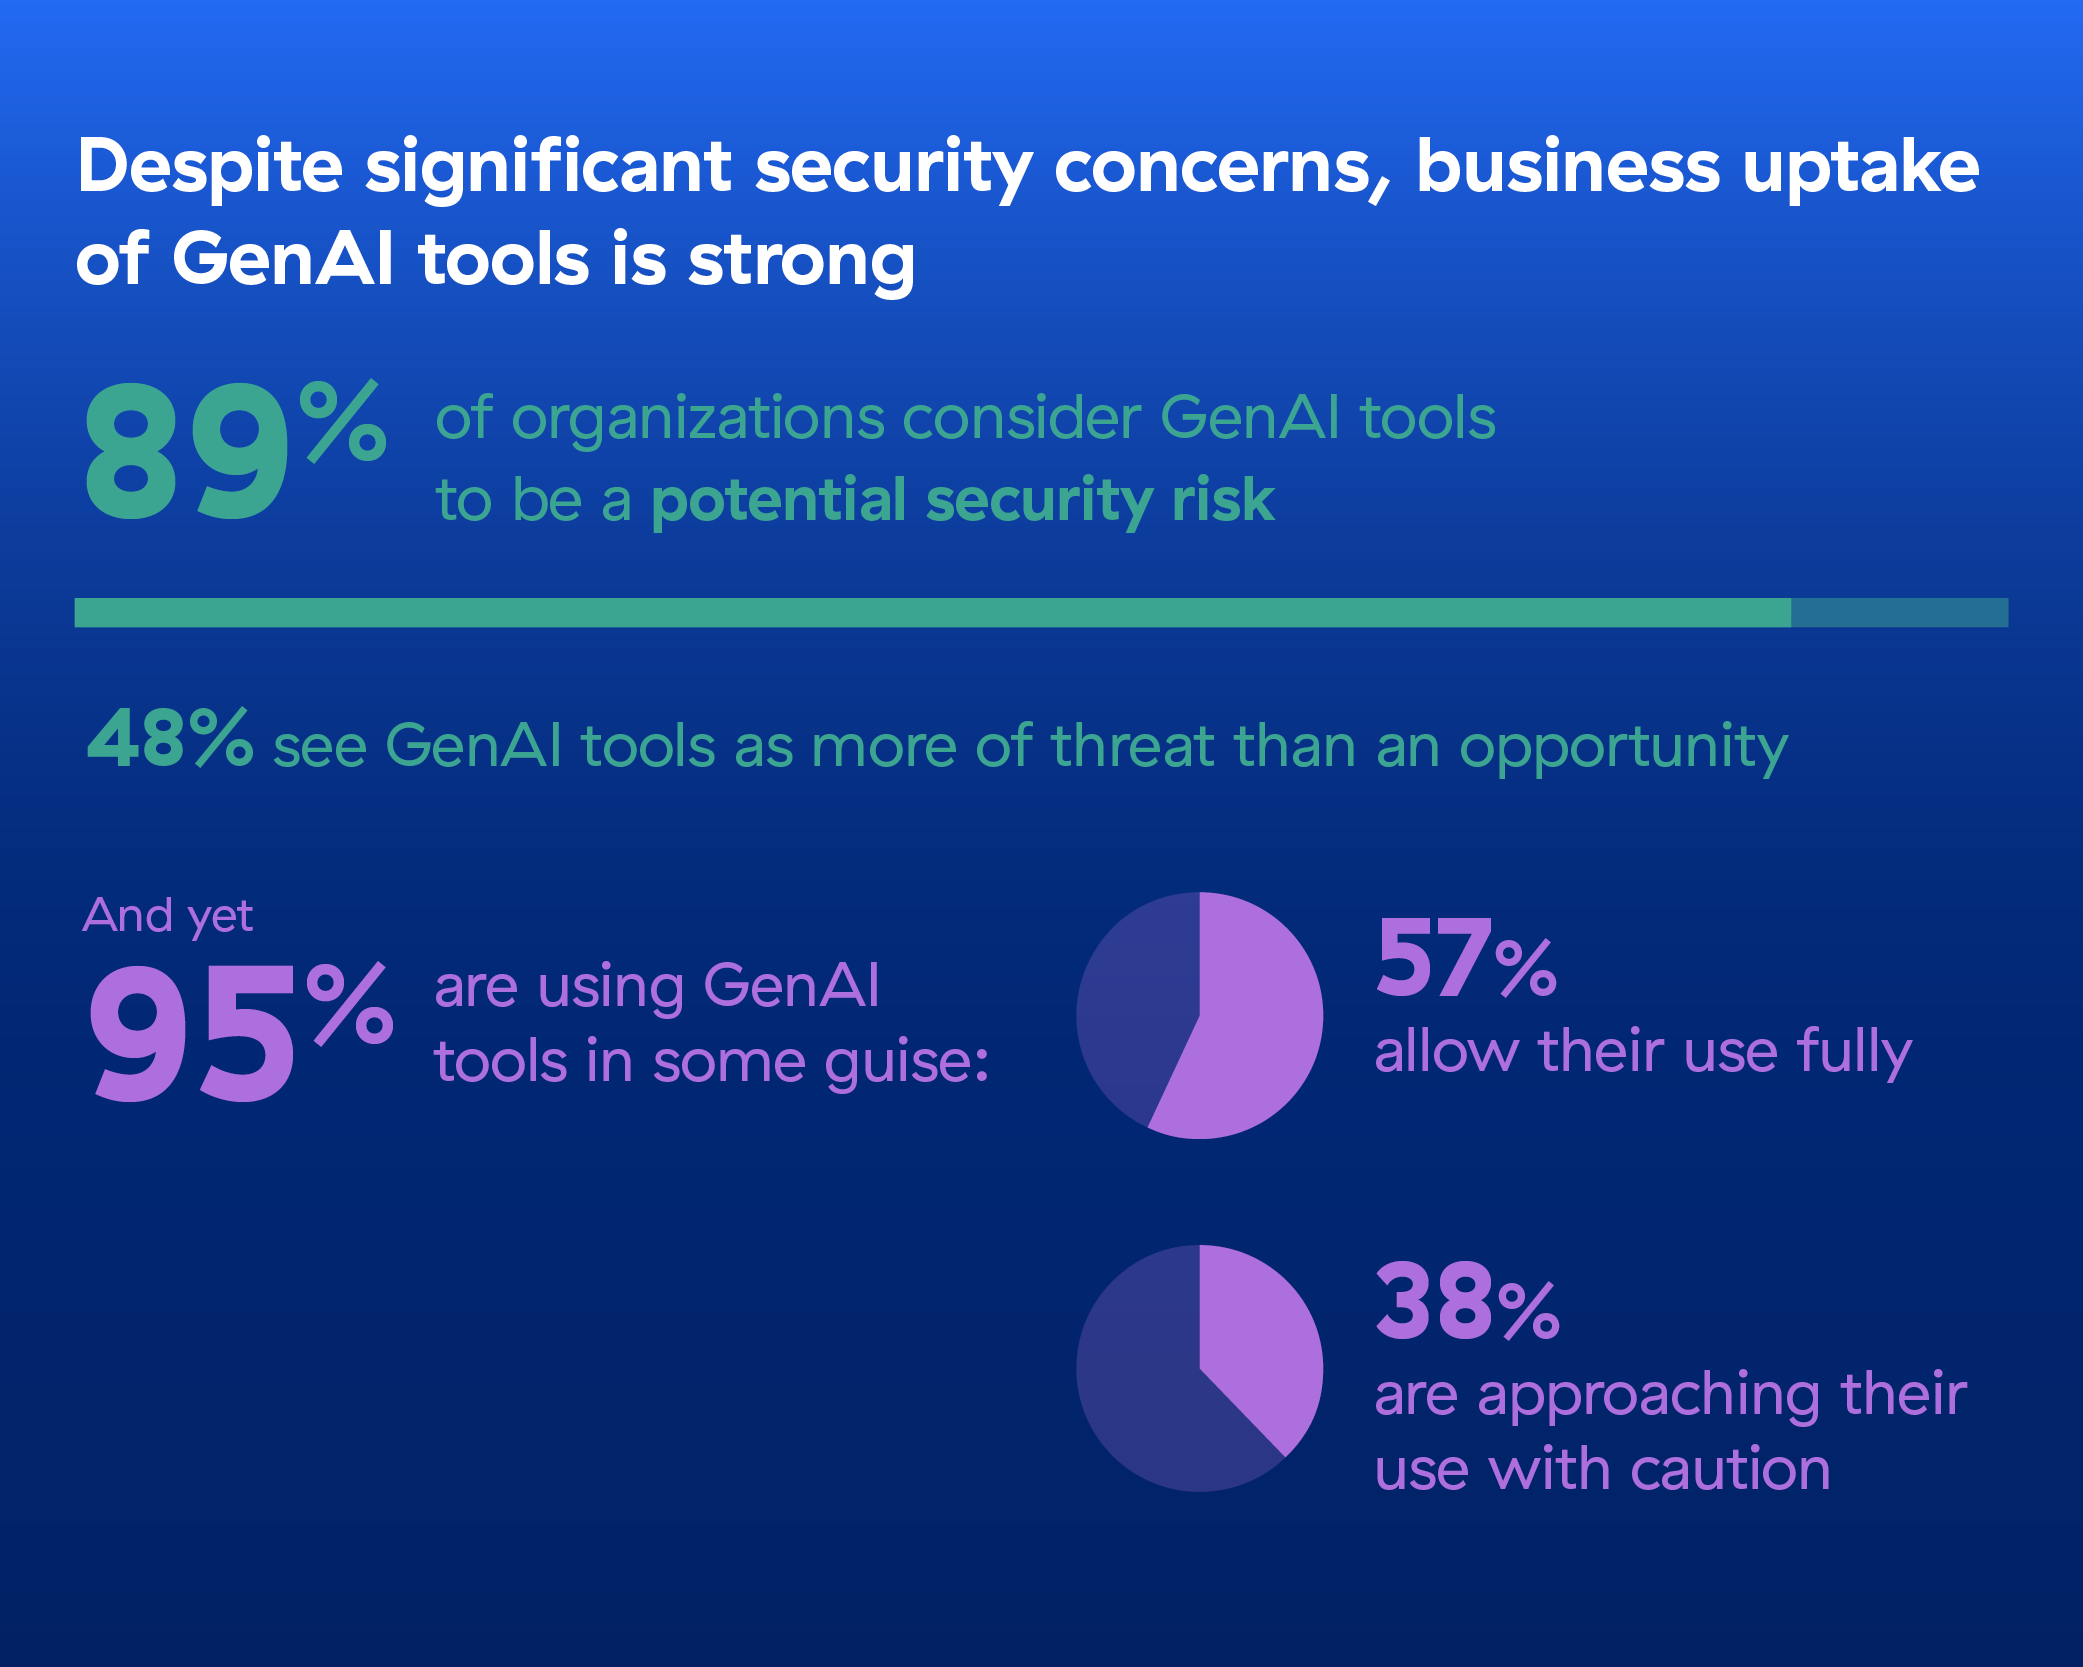 Are companies ignoring the potential security risks associated with GenAI?